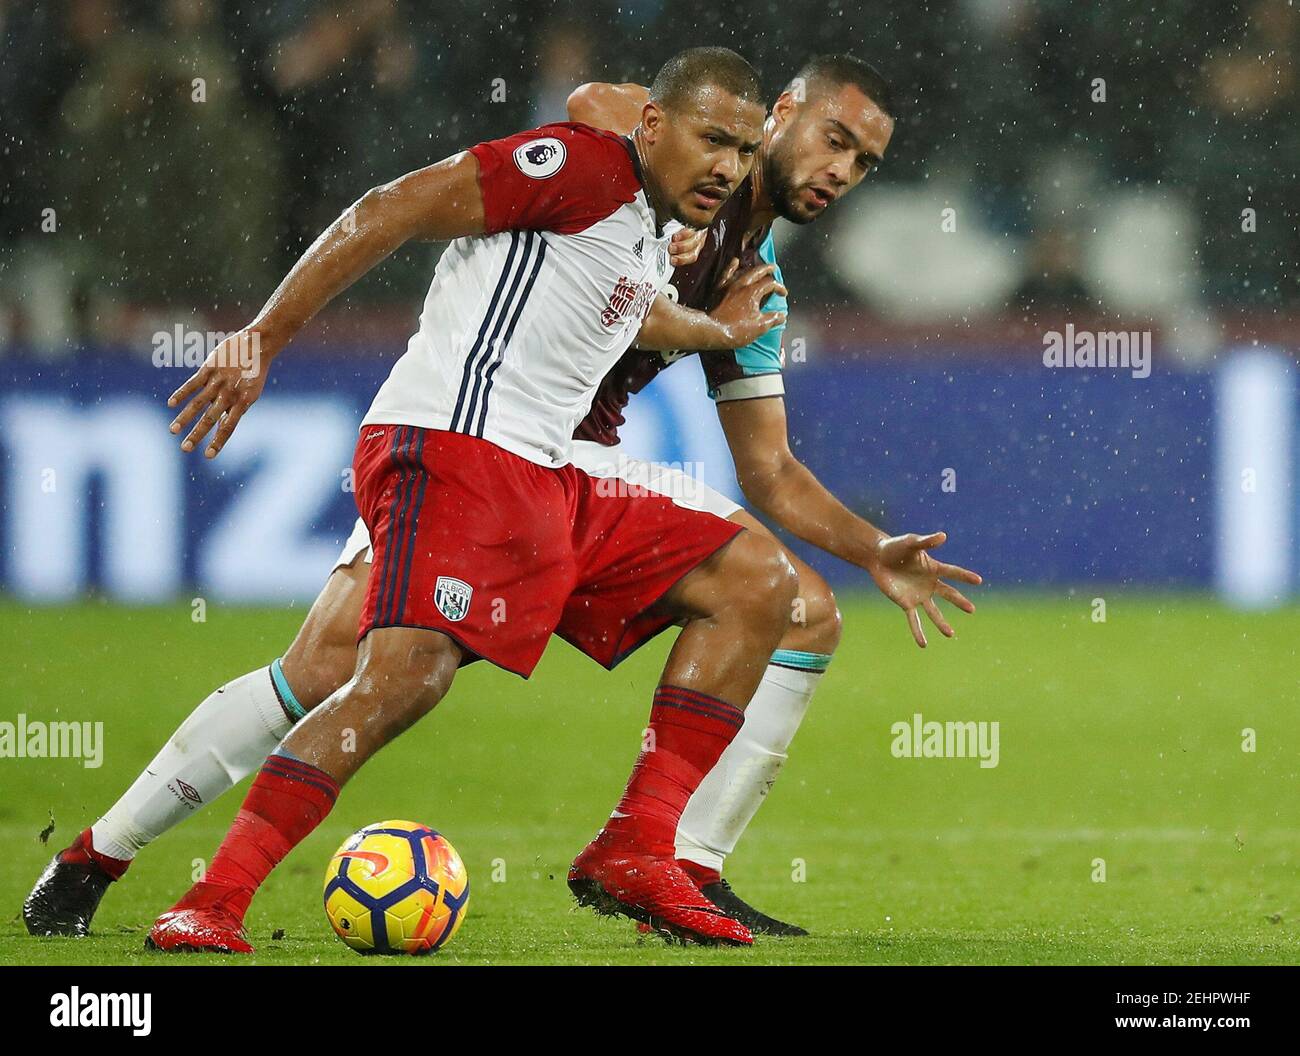 Soccer Football - Premier League - West Ham United vs West Bromwich Albion - London Stadium, London, Britain - January 2, 2018   West Bromwich Albion's Salomon Rondon in action with West Ham United's Winston Reid    REUTERS/Eddie Keogh    EDITORIAL USE ONLY. No use with unauthorized audio, video, data, fixture lists, club/league logos or "live" services. Online in-match use limited to 75 images, no video emulation. No use in betting, games or single club/league/player publications.  Please contact your account representative for further details. Stock Photo